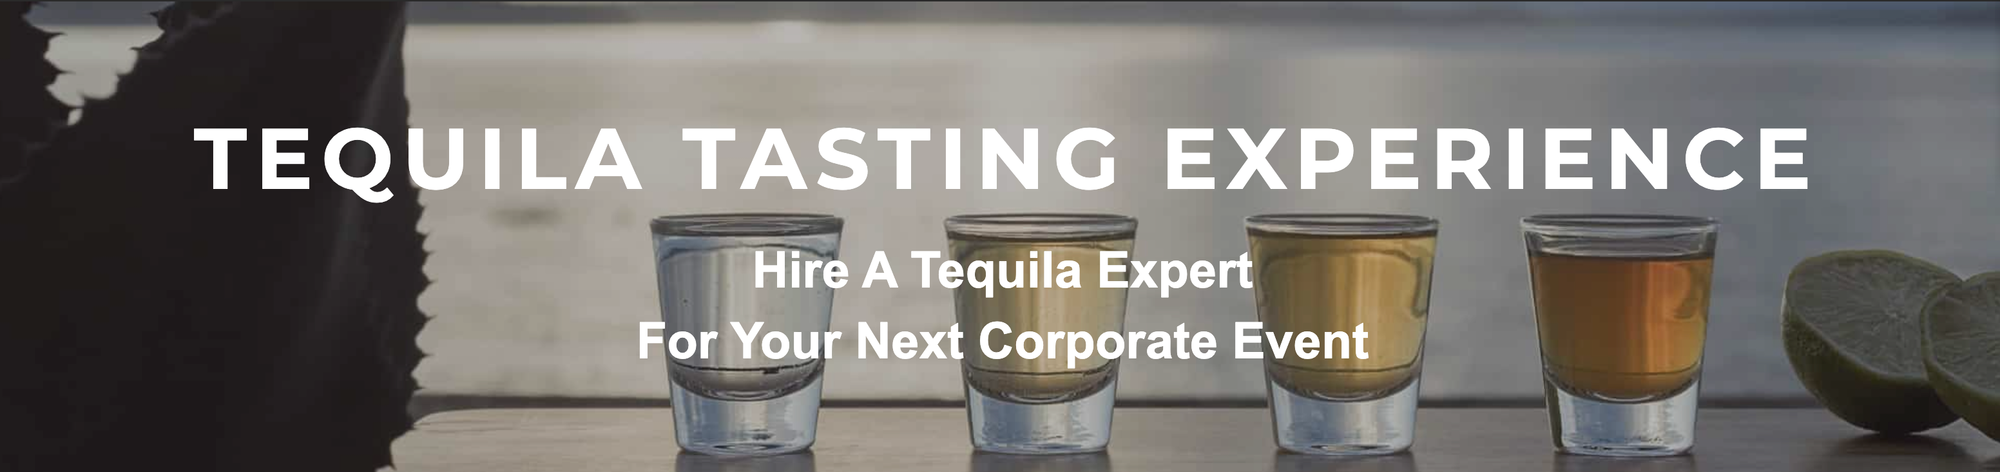 Tequila Tasting Experience